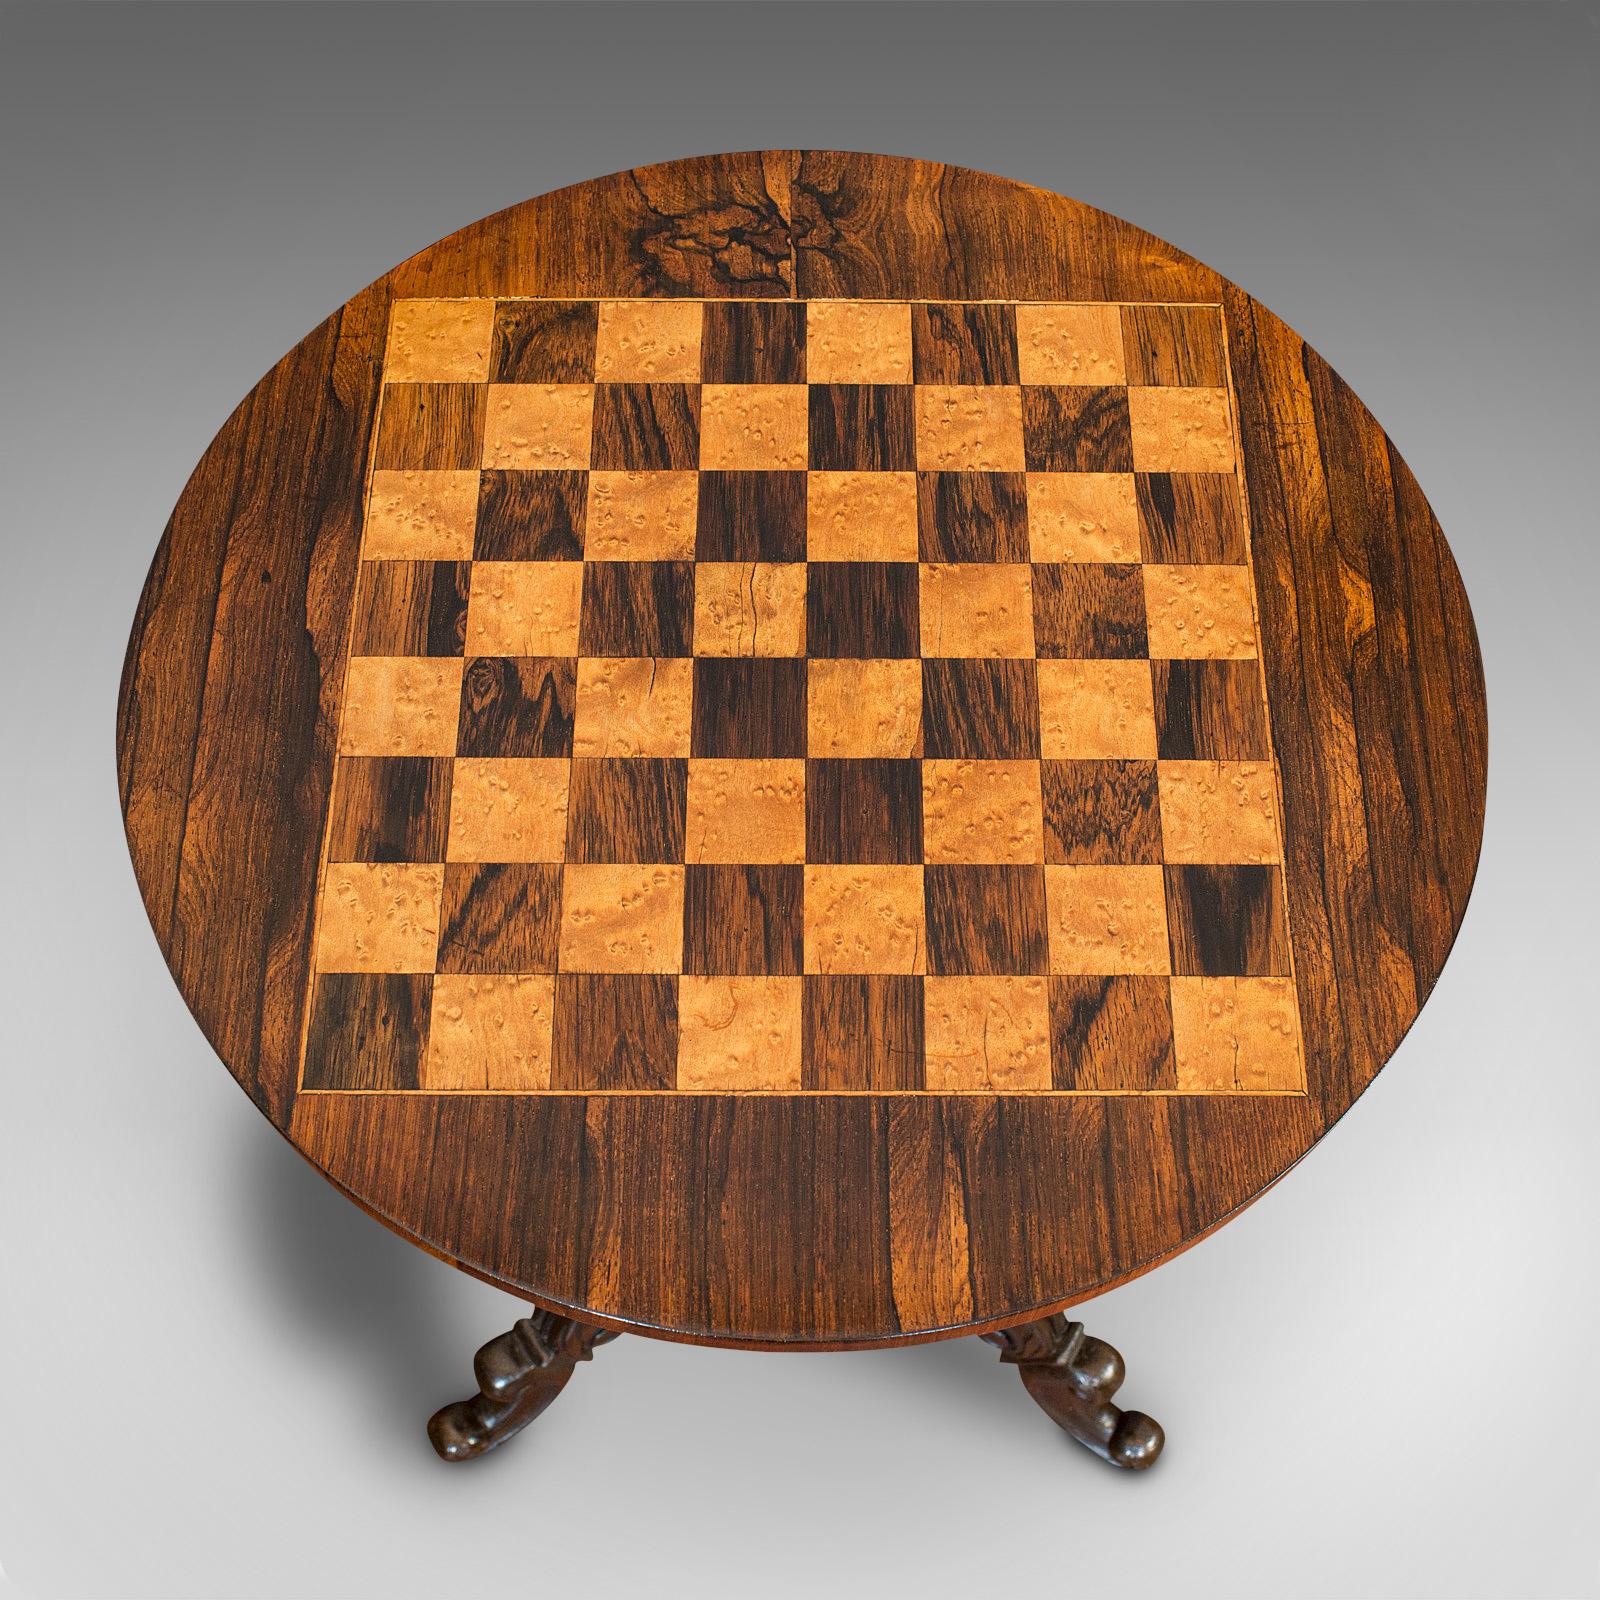 Antique Games Table, English, Rosewood, Mahogany, Chess Board, Victorian 1